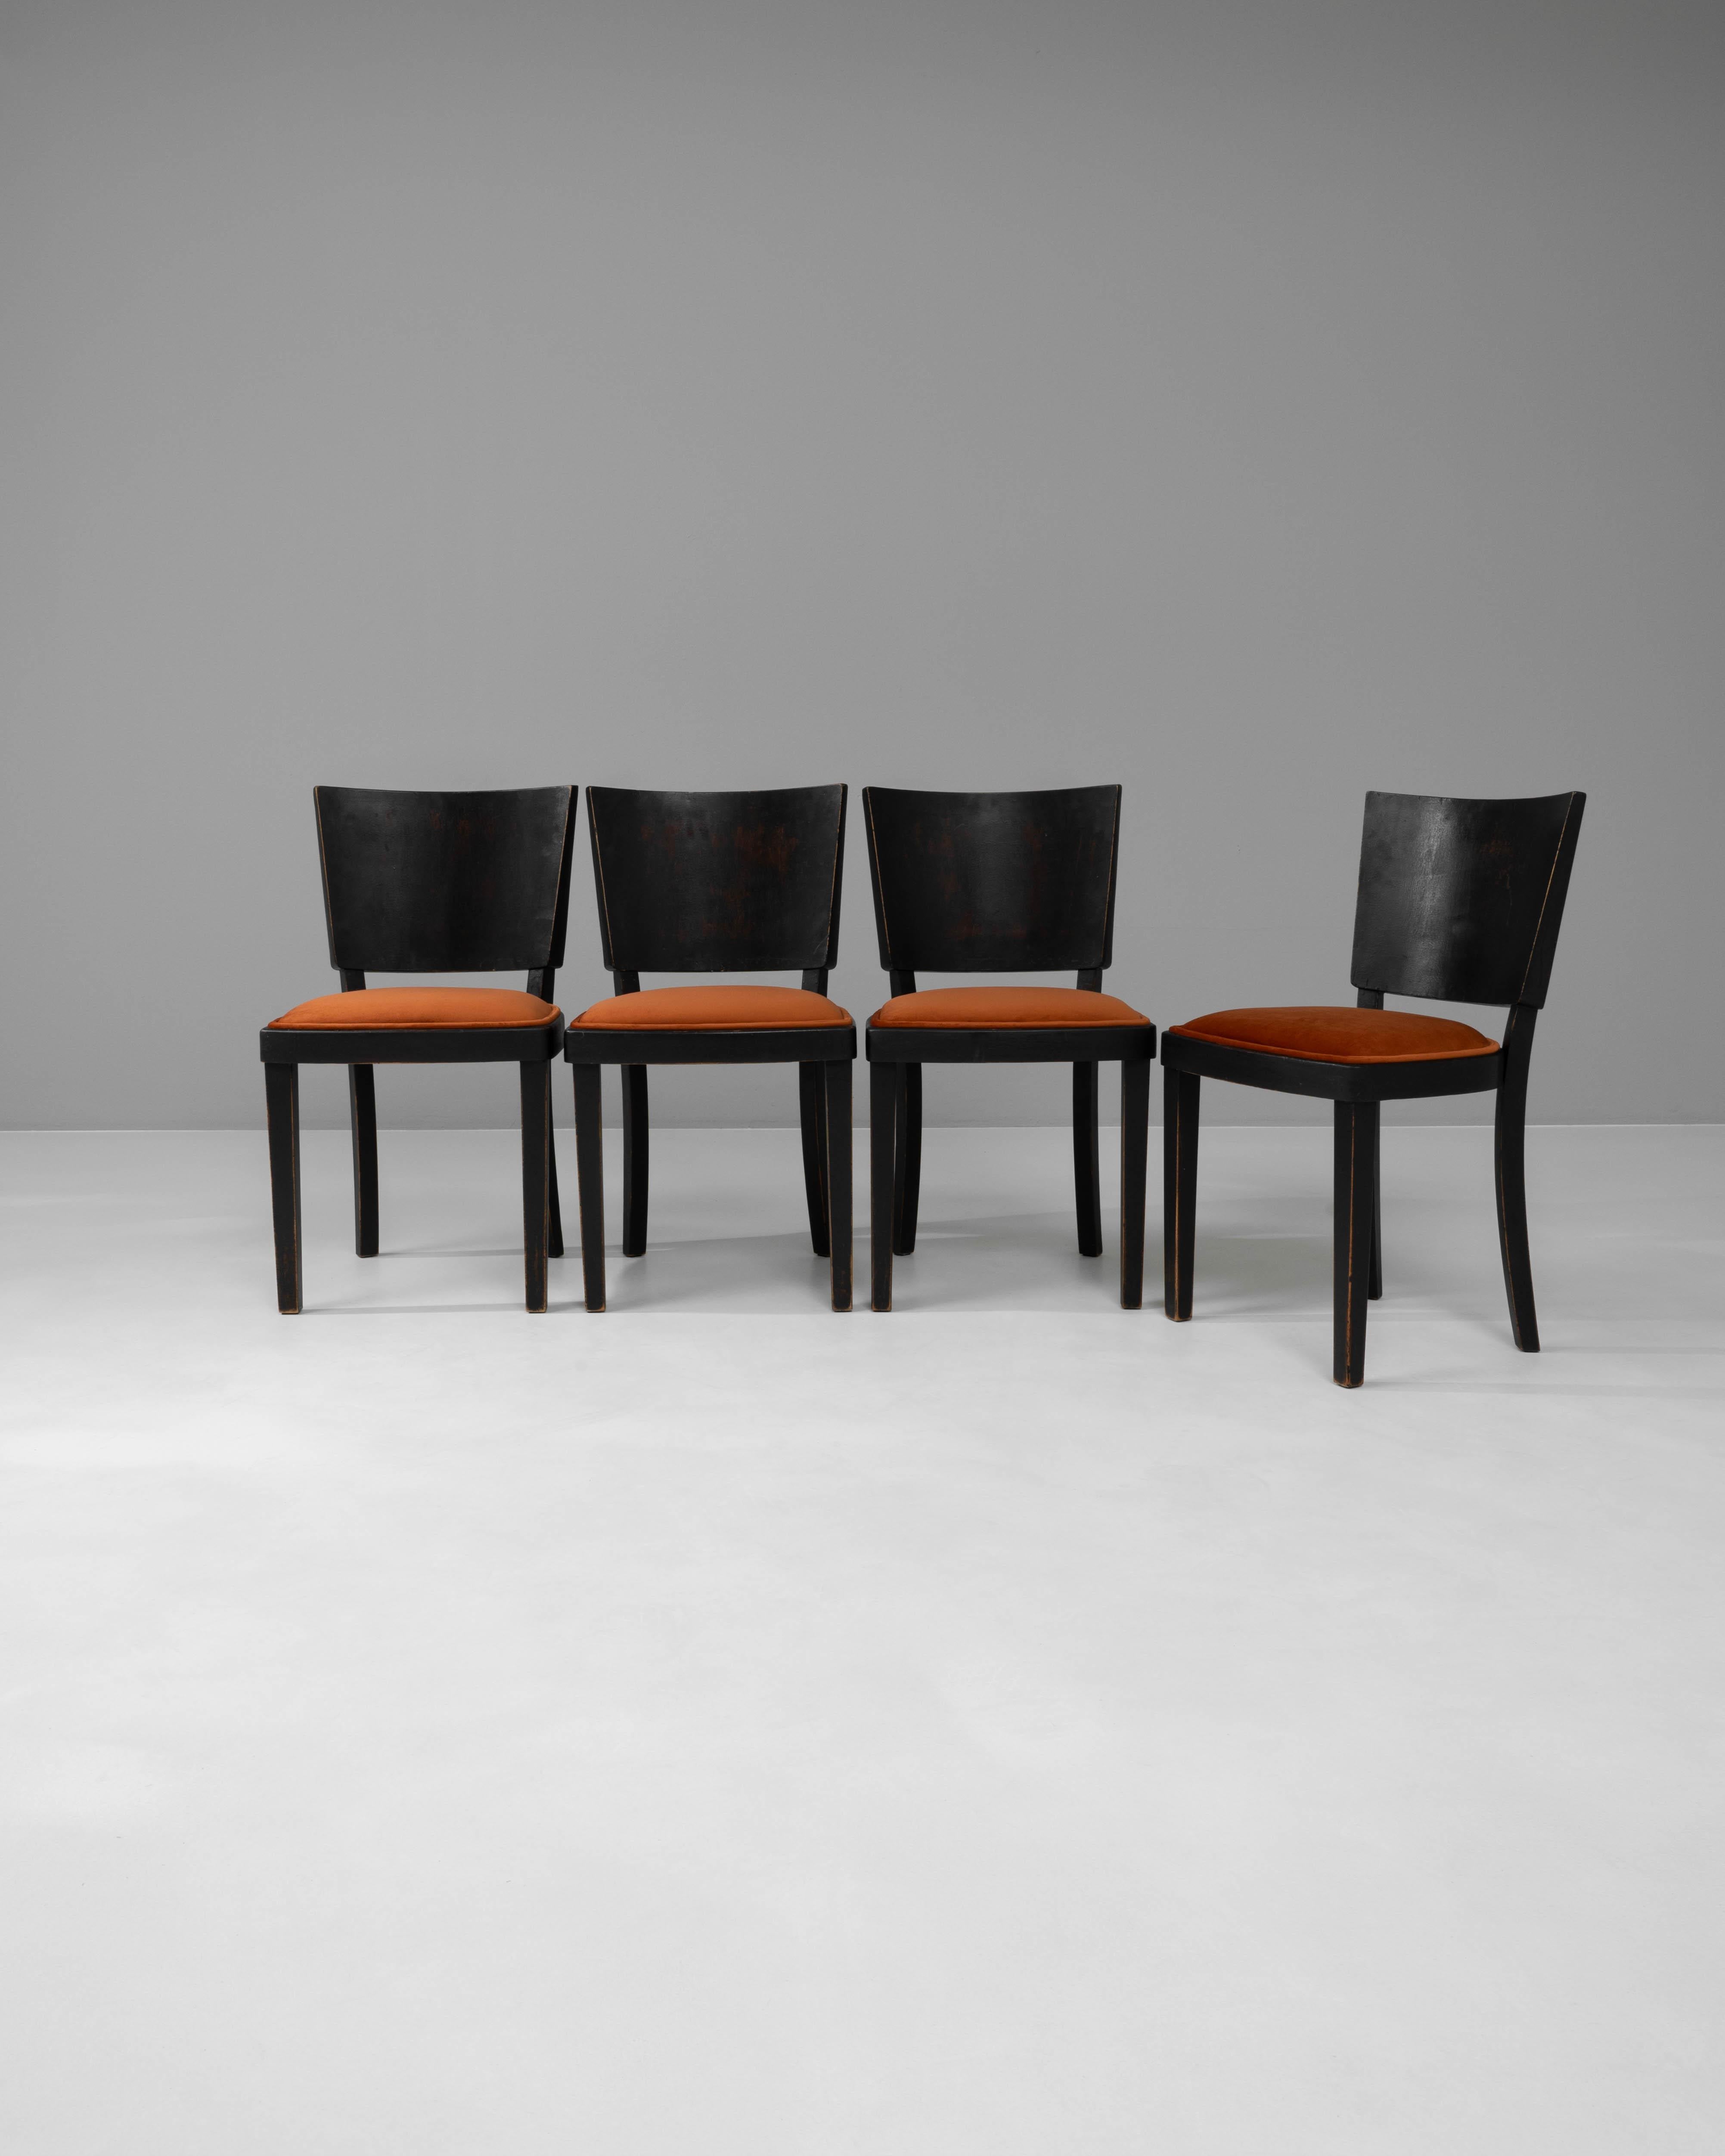 Introduce a touch of mid-century elegance to your dining space with this sophisticated set of four 1950s Czech Wooden Dining Chairs. Each chair features a sleek, dark wooden frame that provides a stark contrast to the vibrant orange upholstered